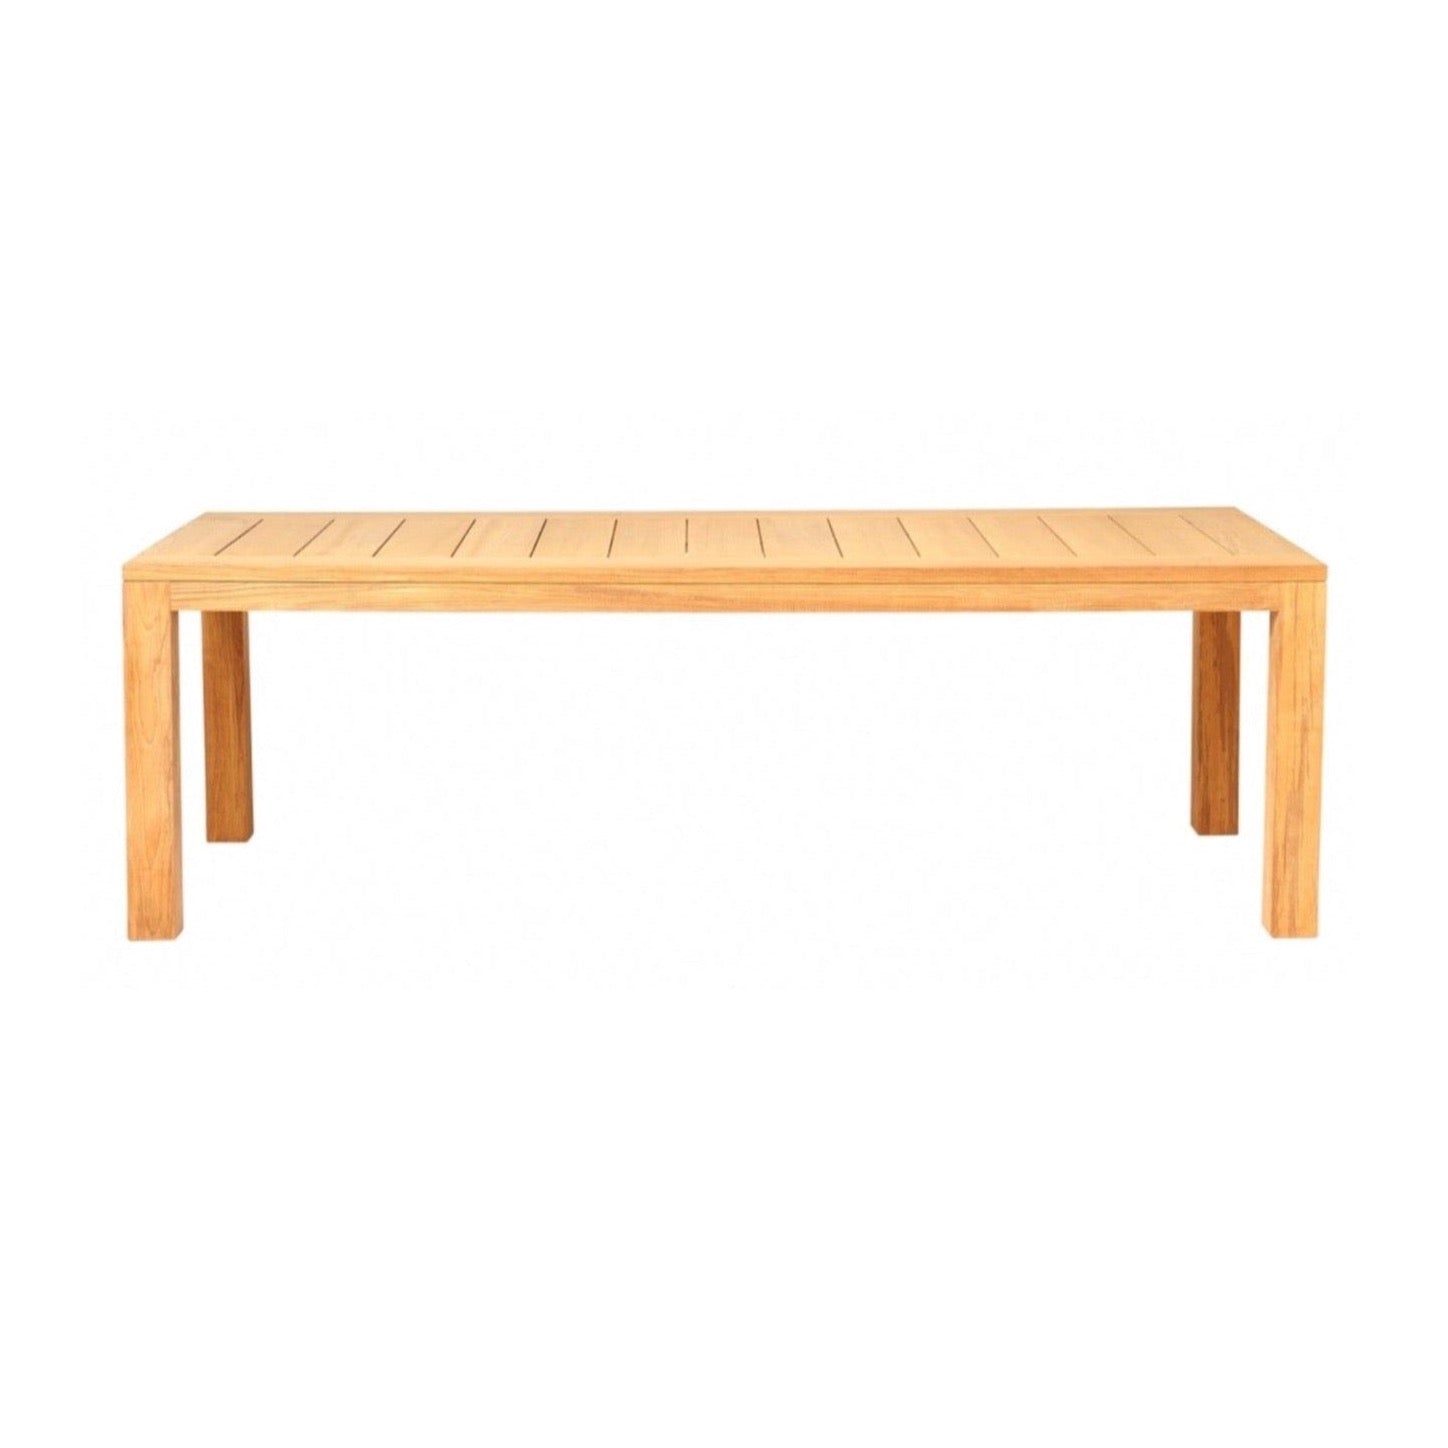 Traditional teak Grace dining table 300 cm